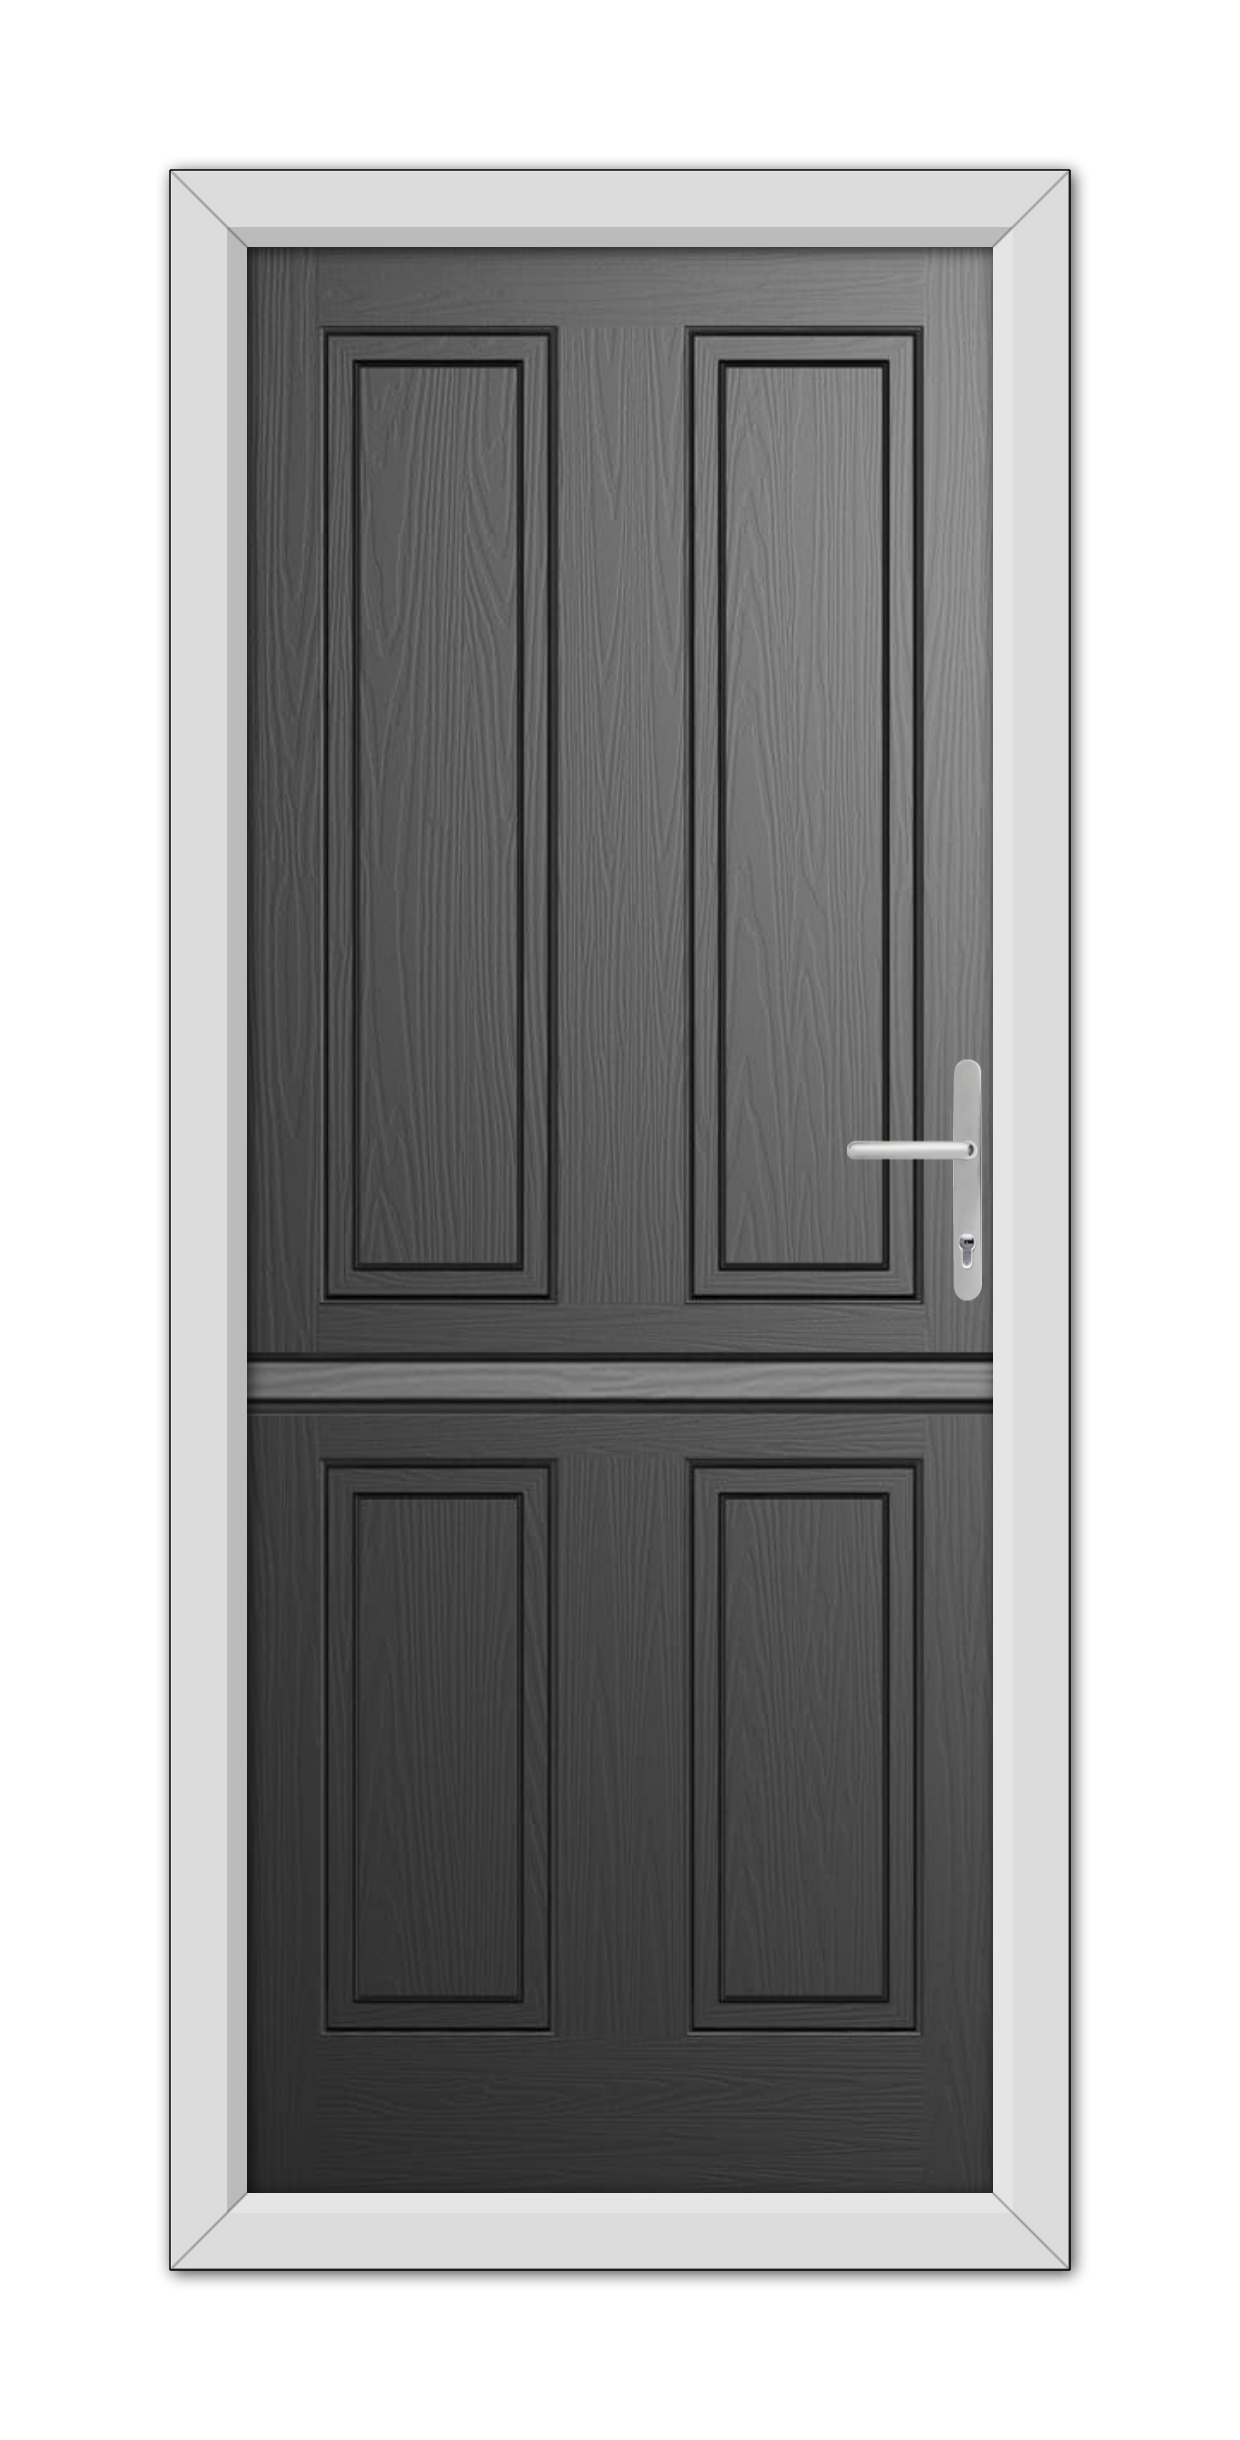 A modern Black Whitmore Solid Stable Composite Door with four panels and a silver handle, set within a white frame.